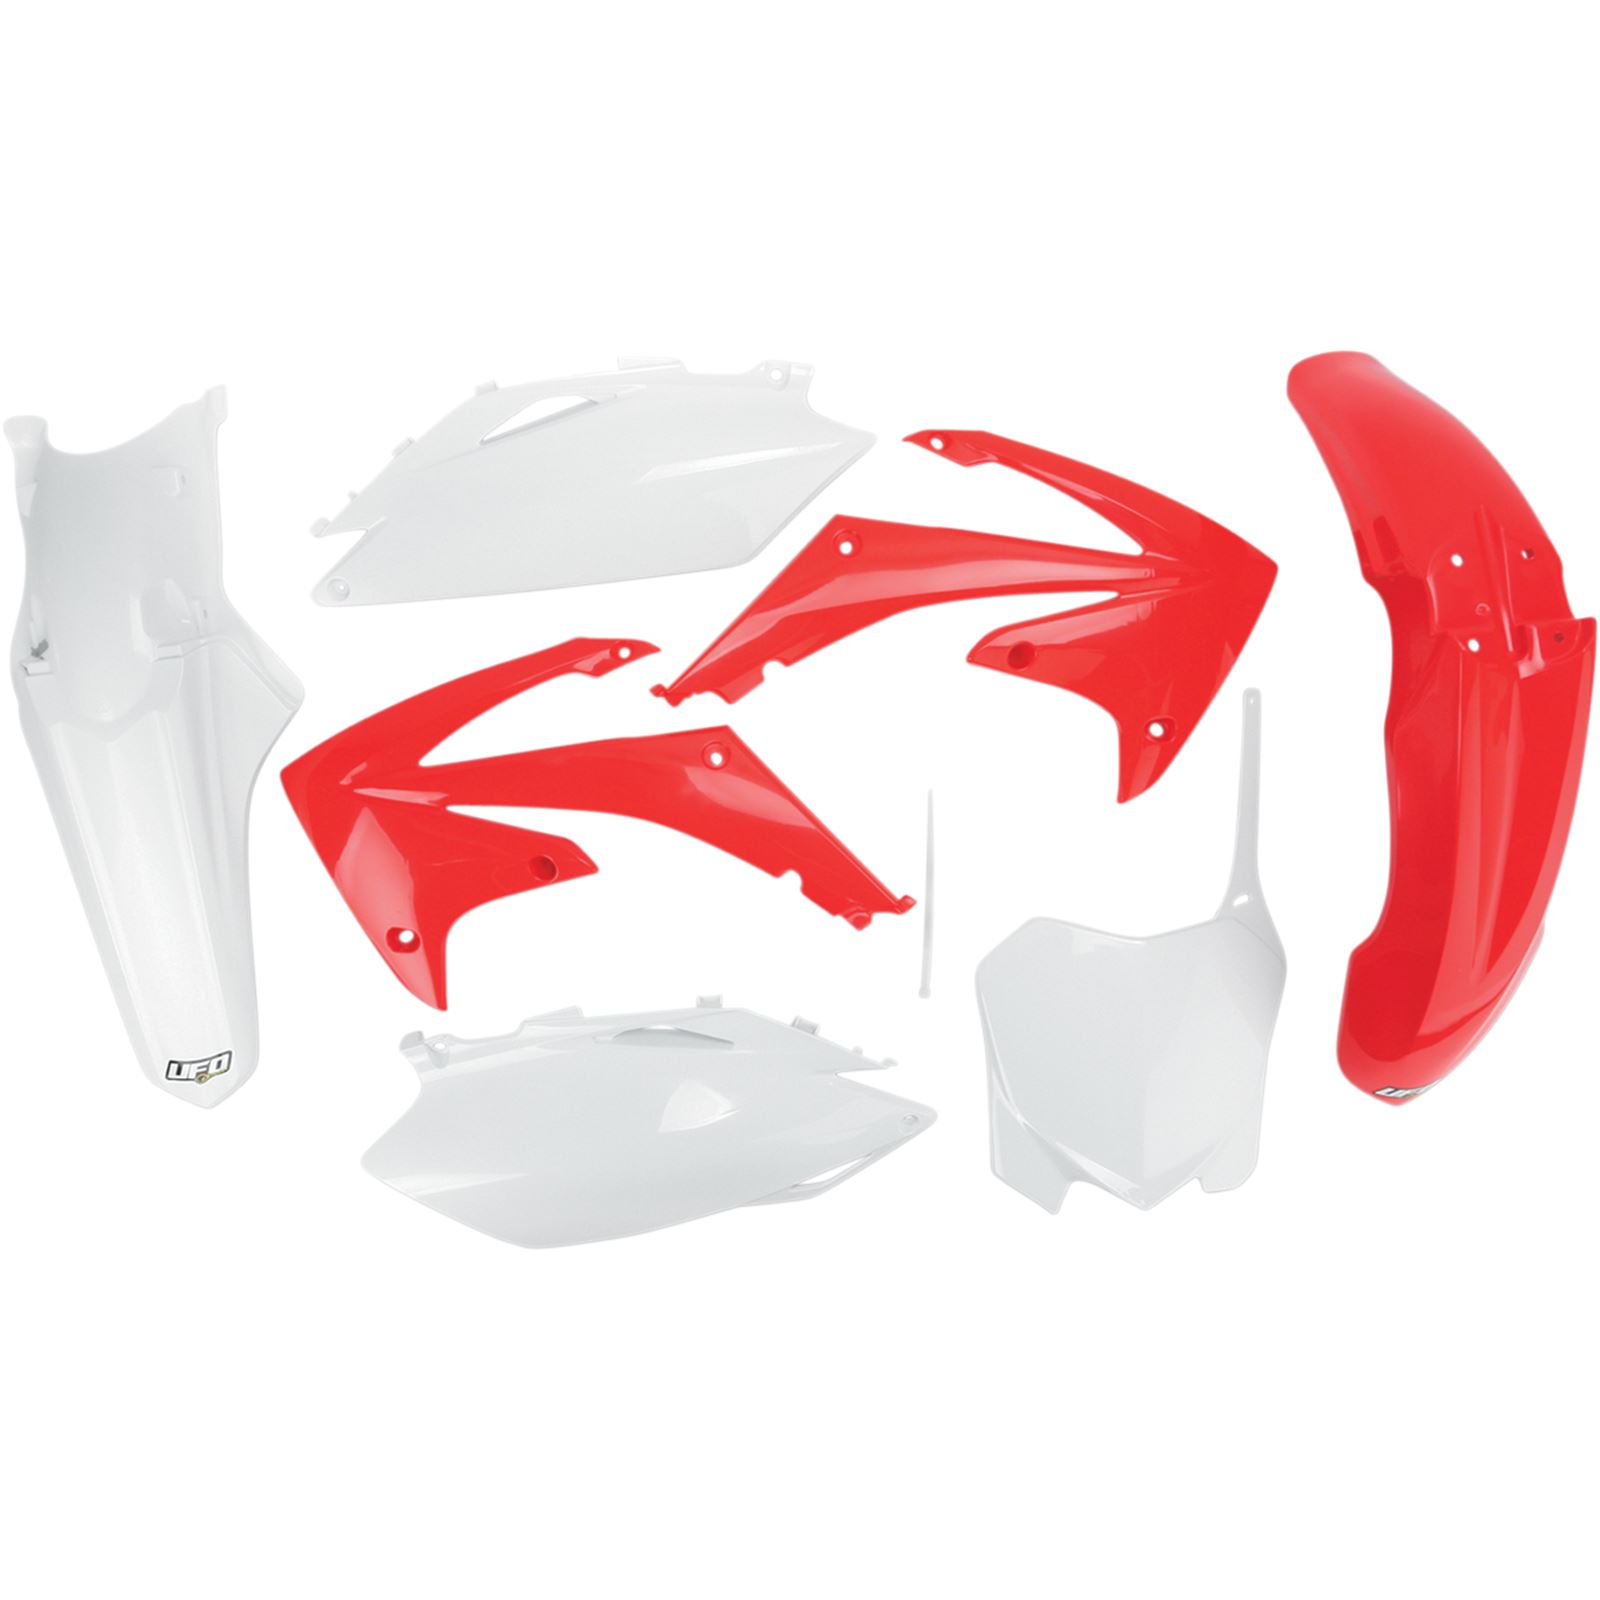 UFO Plastics Replacement Body Kit - OE Red/White - '10 CRF250R/'09-'10 CRF450R